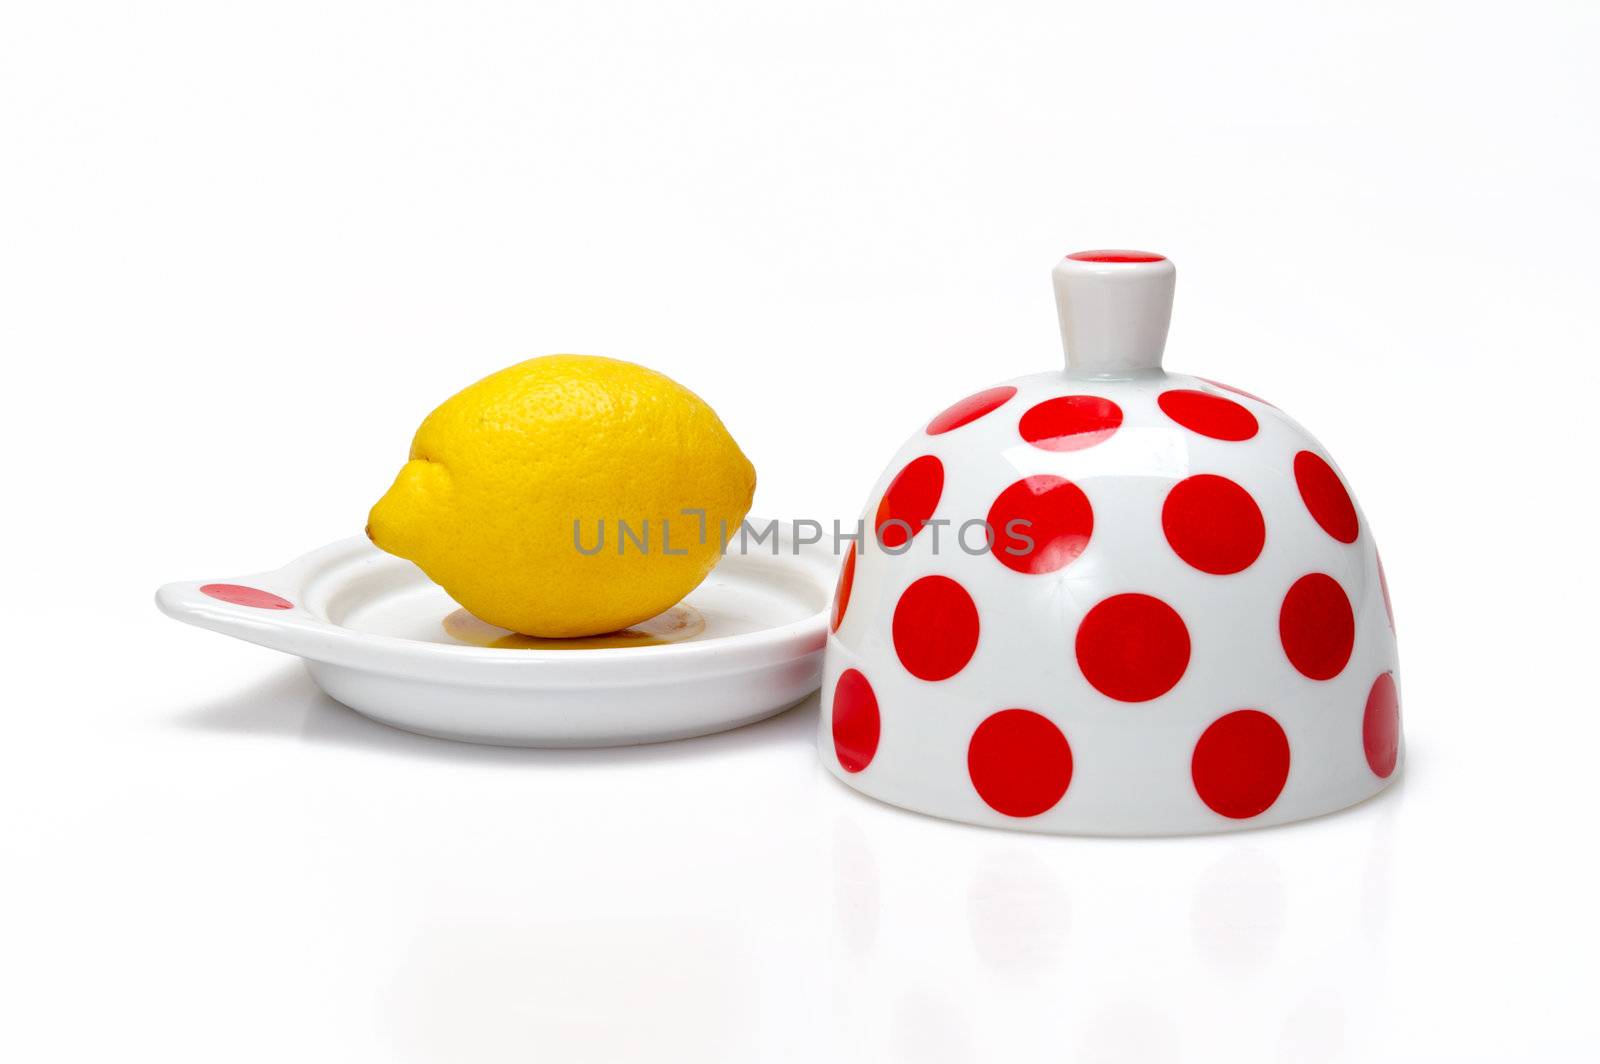 Lemon in a open bank on a white background